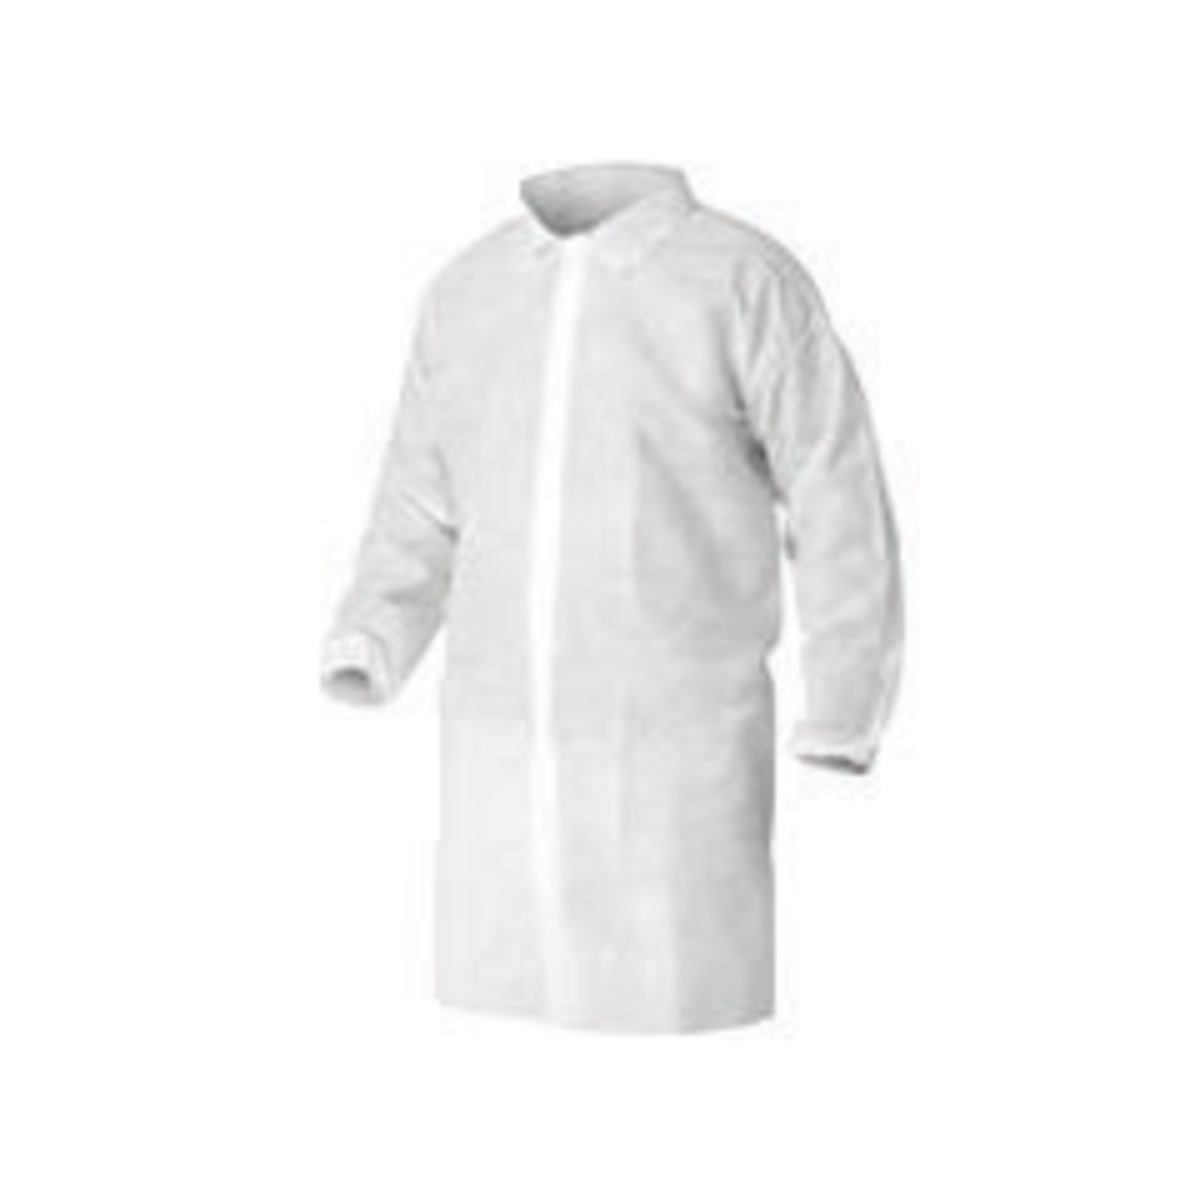 Kimberly-Clark Professional™ X-Large White KleenGuard™ A10 Polypropylene Disposable Lab Coat (Availability restrictions apply.)